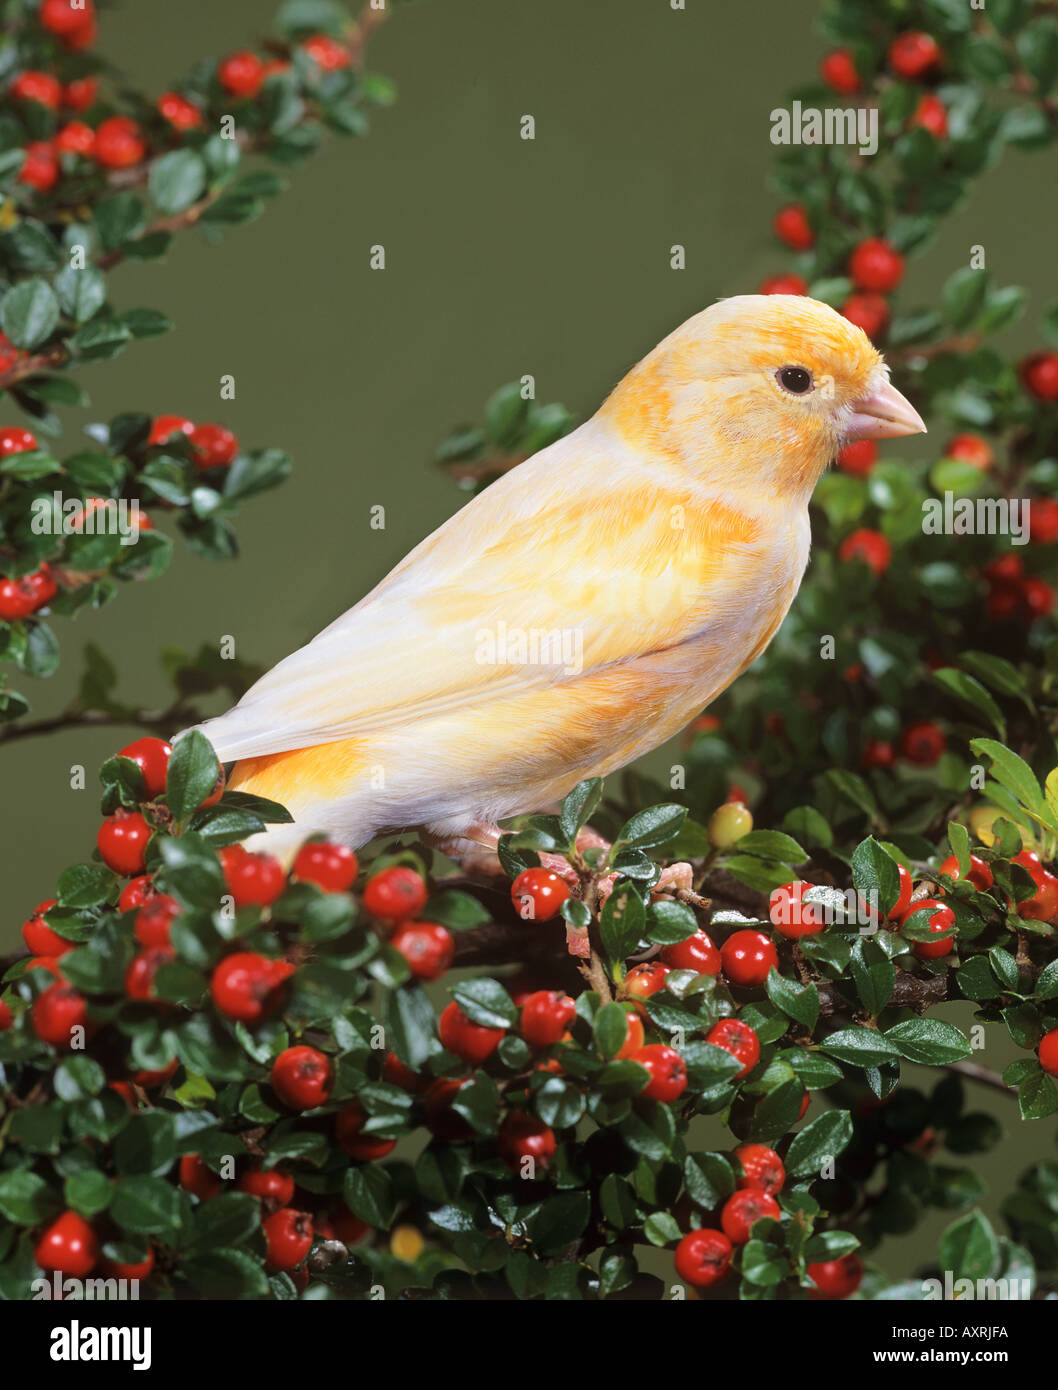 canary bird on twig with berries Serinus canaria Stock Photo